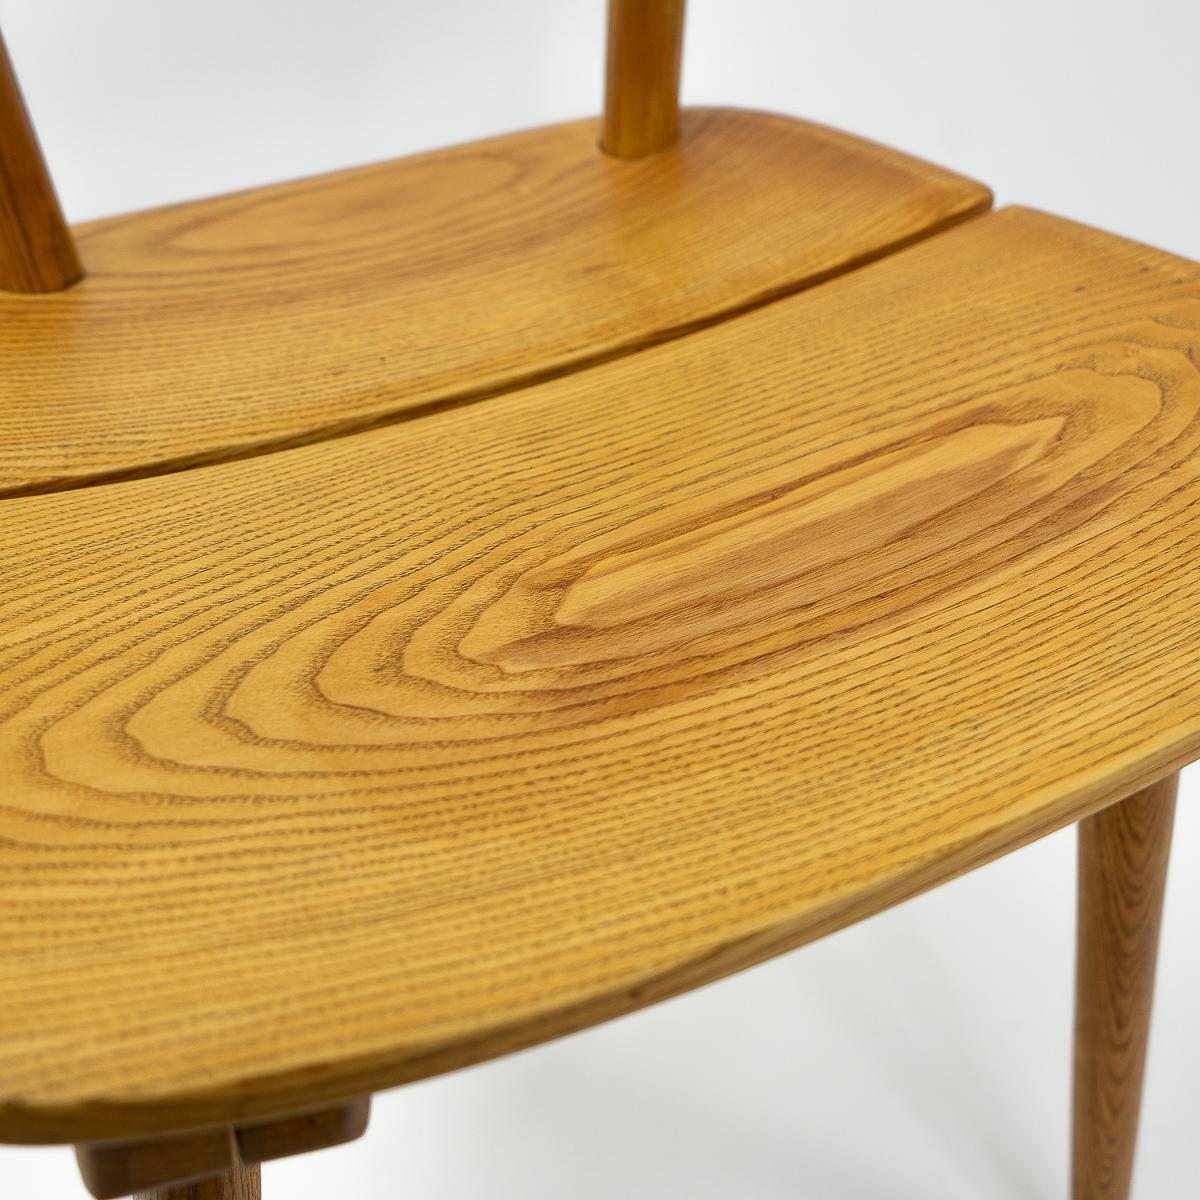 Jakob Müller Side Chair for Wohnhilfe, Switzerland, 1950s For Sale 1